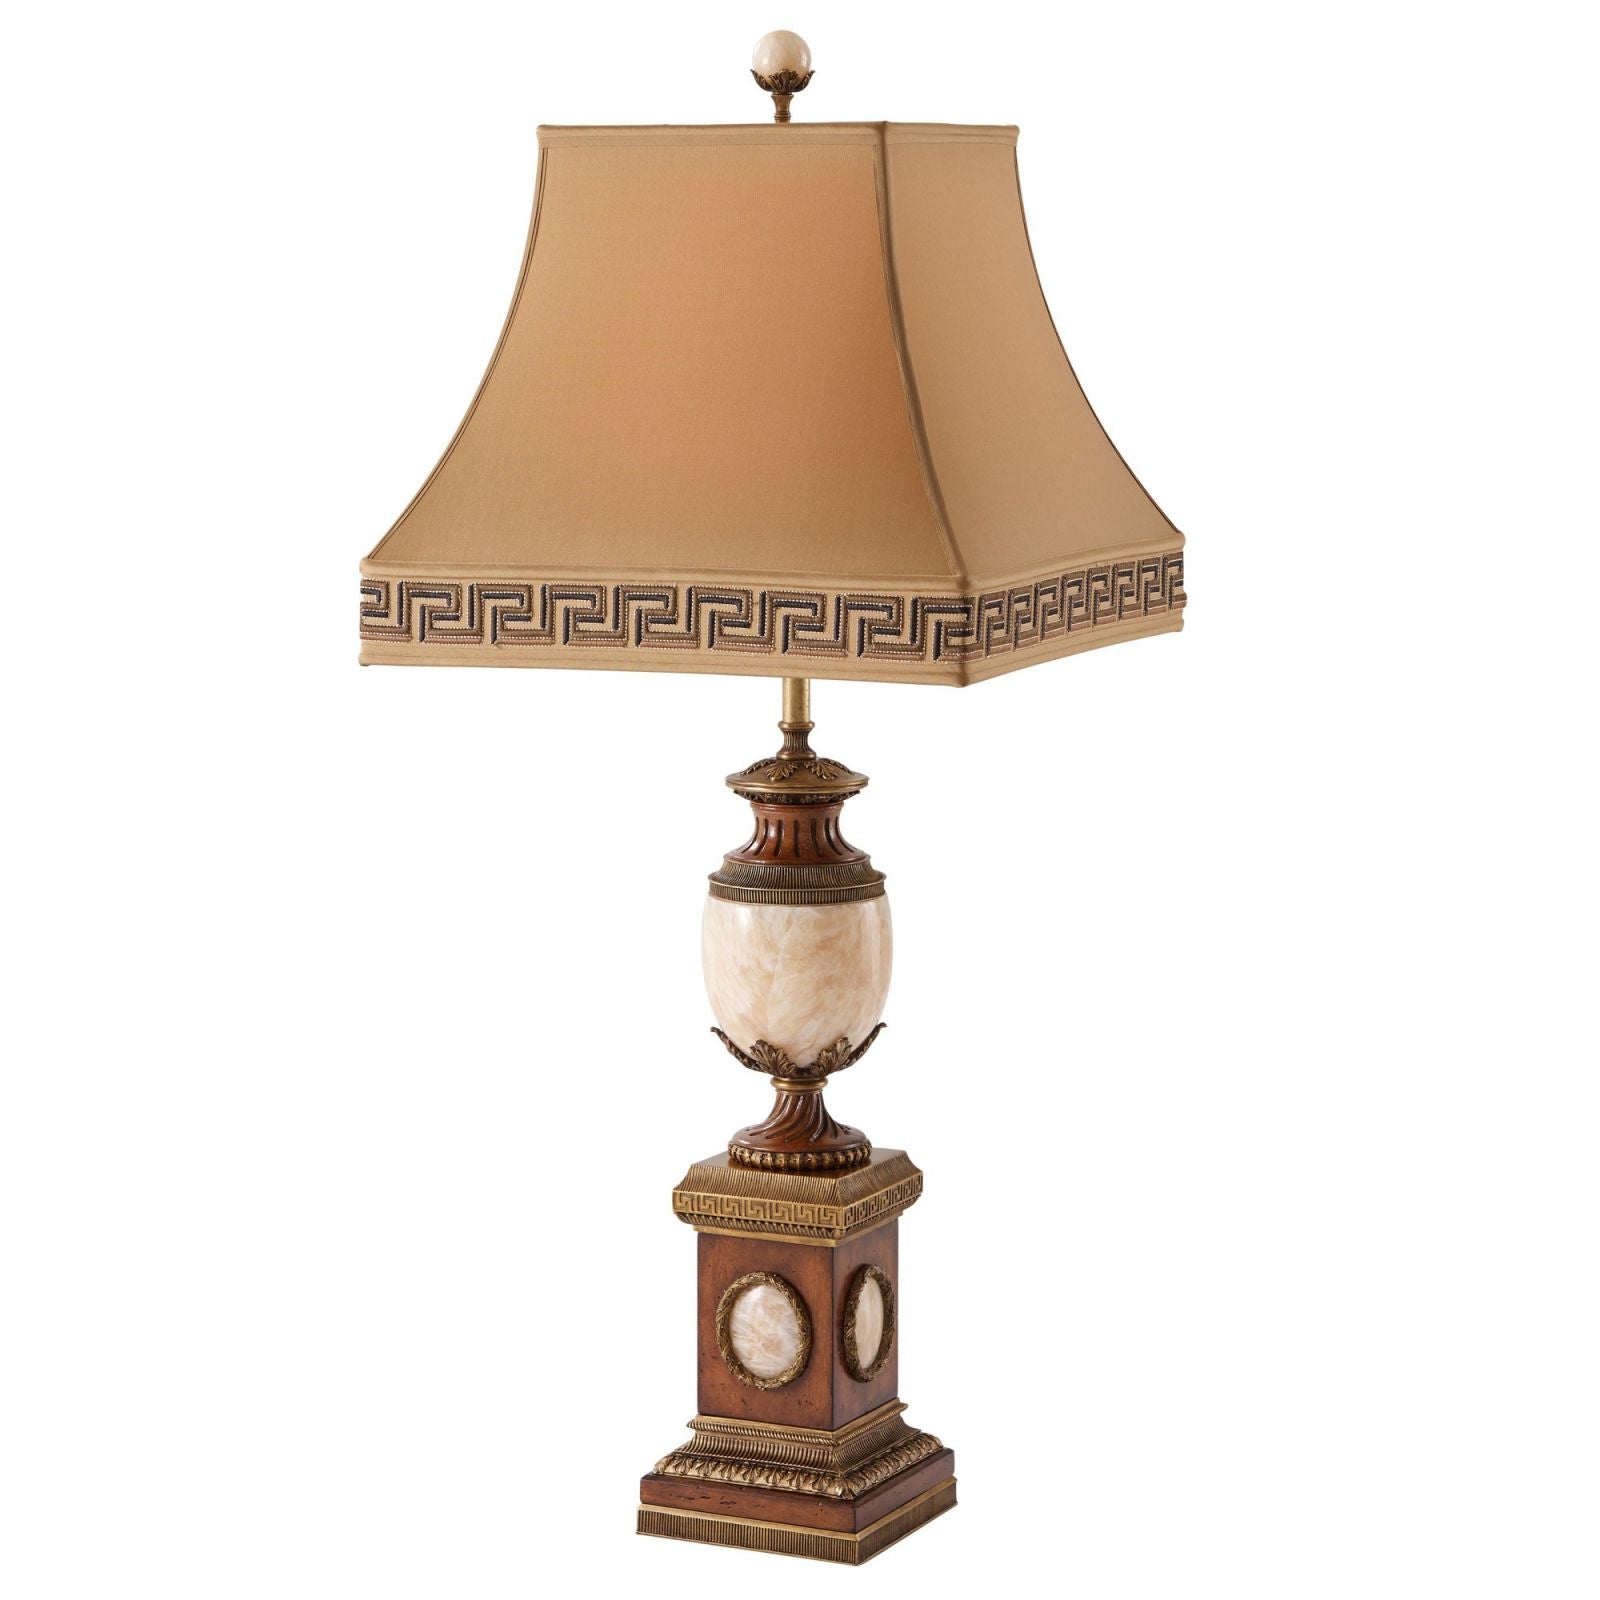 Neo-classical brass and onyx table lamp